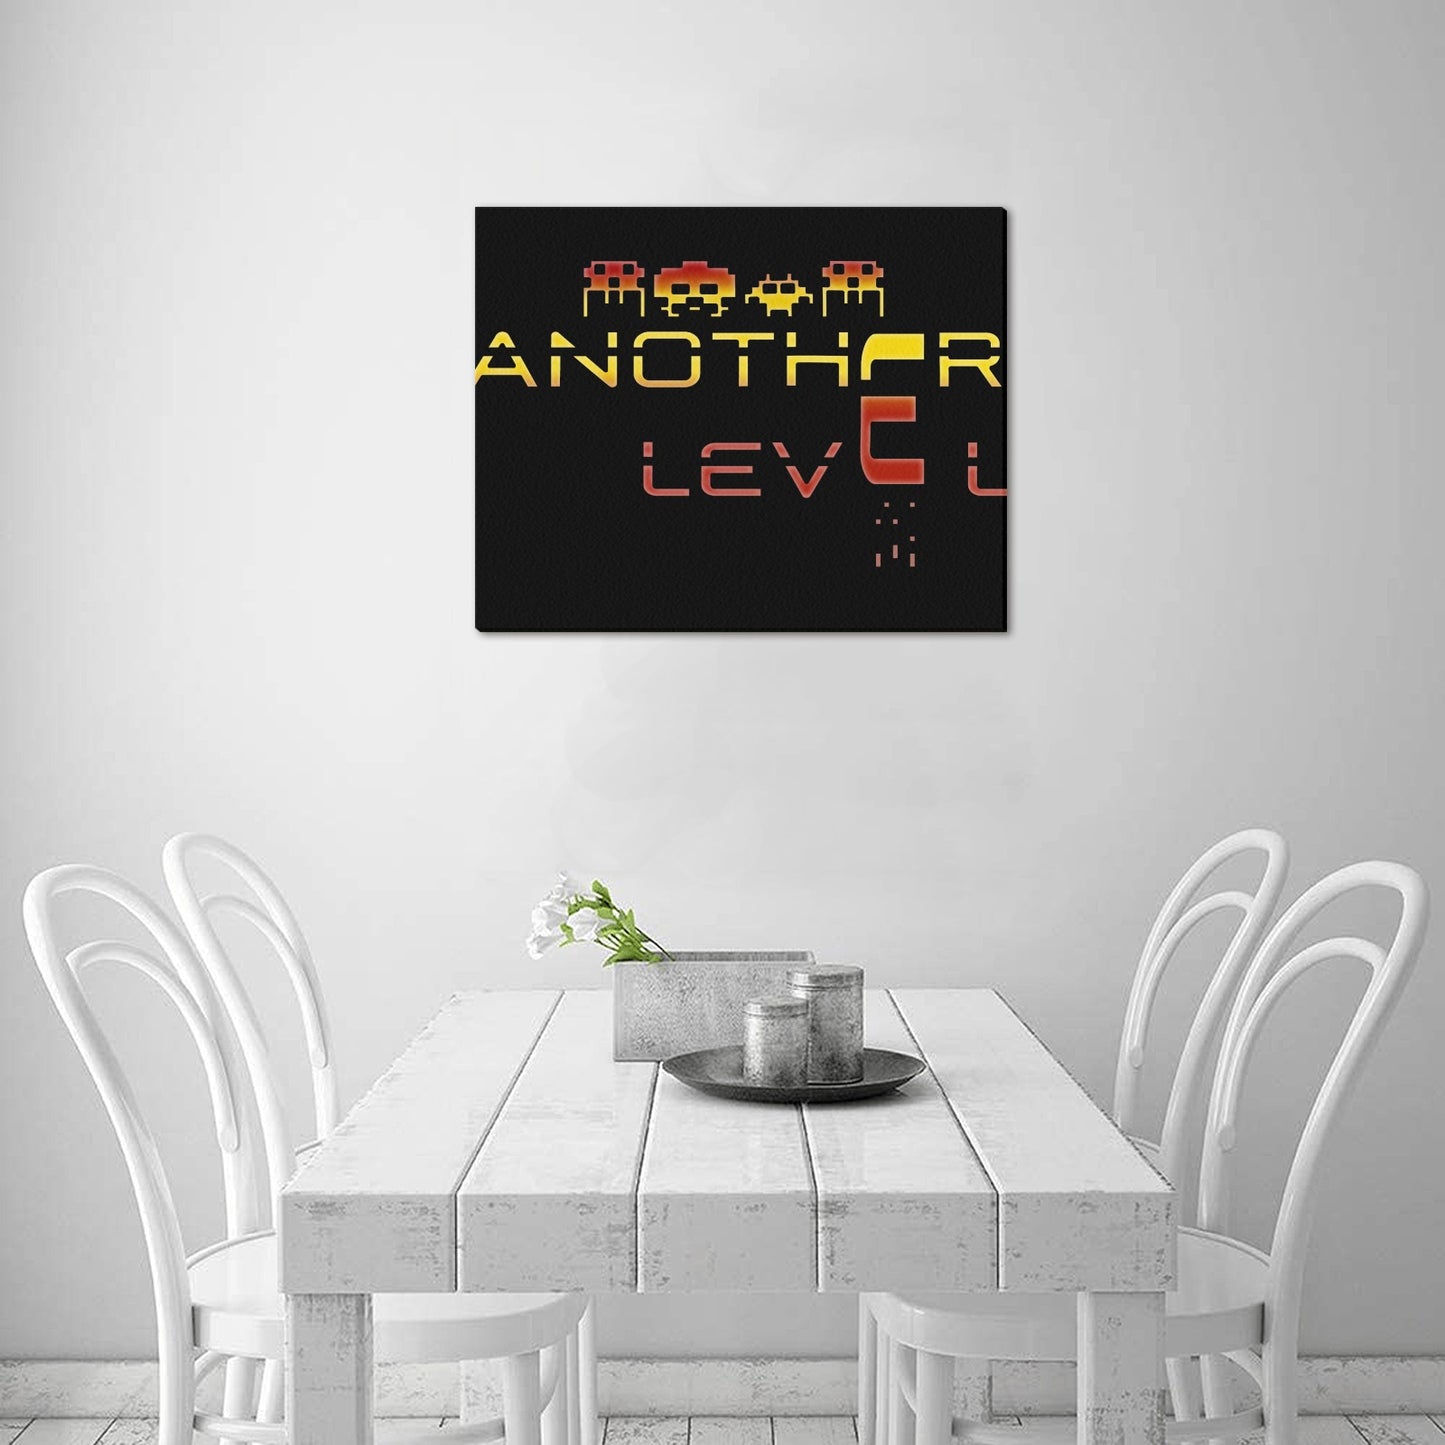 fz design collection one size / fz another level - red framed canvas print 20"x16" (made in usa)